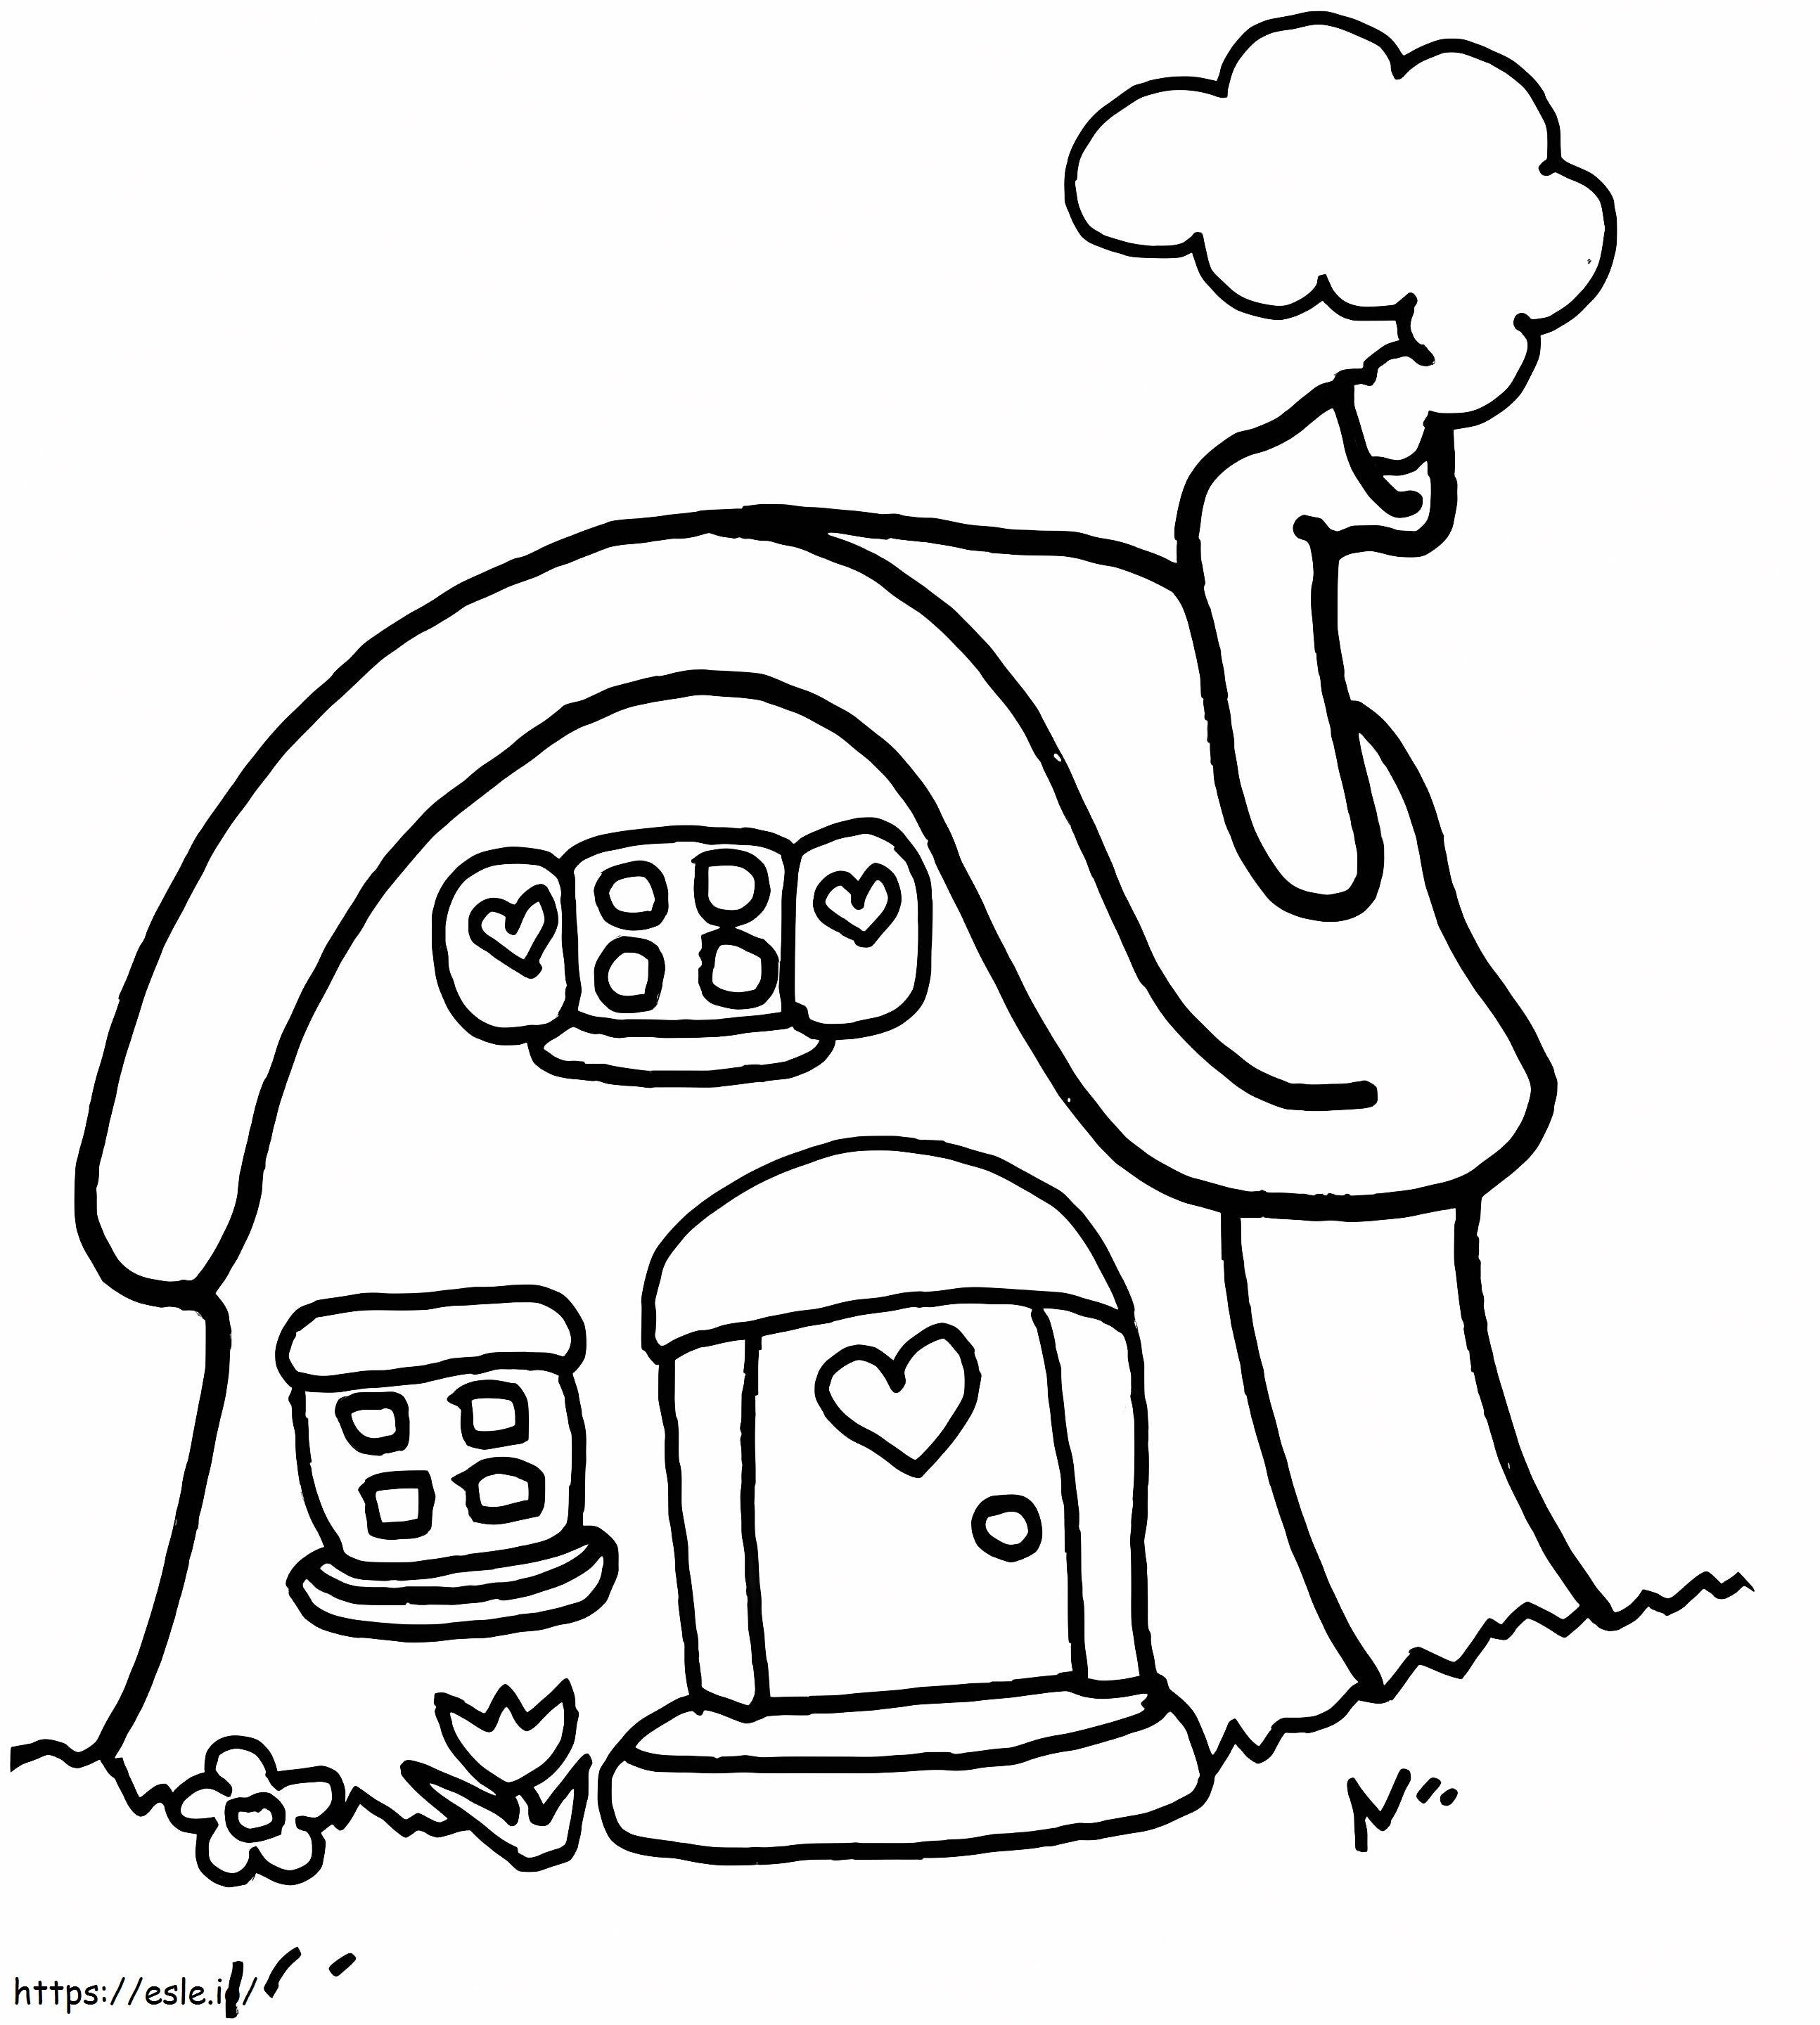 Little Cottage coloring page